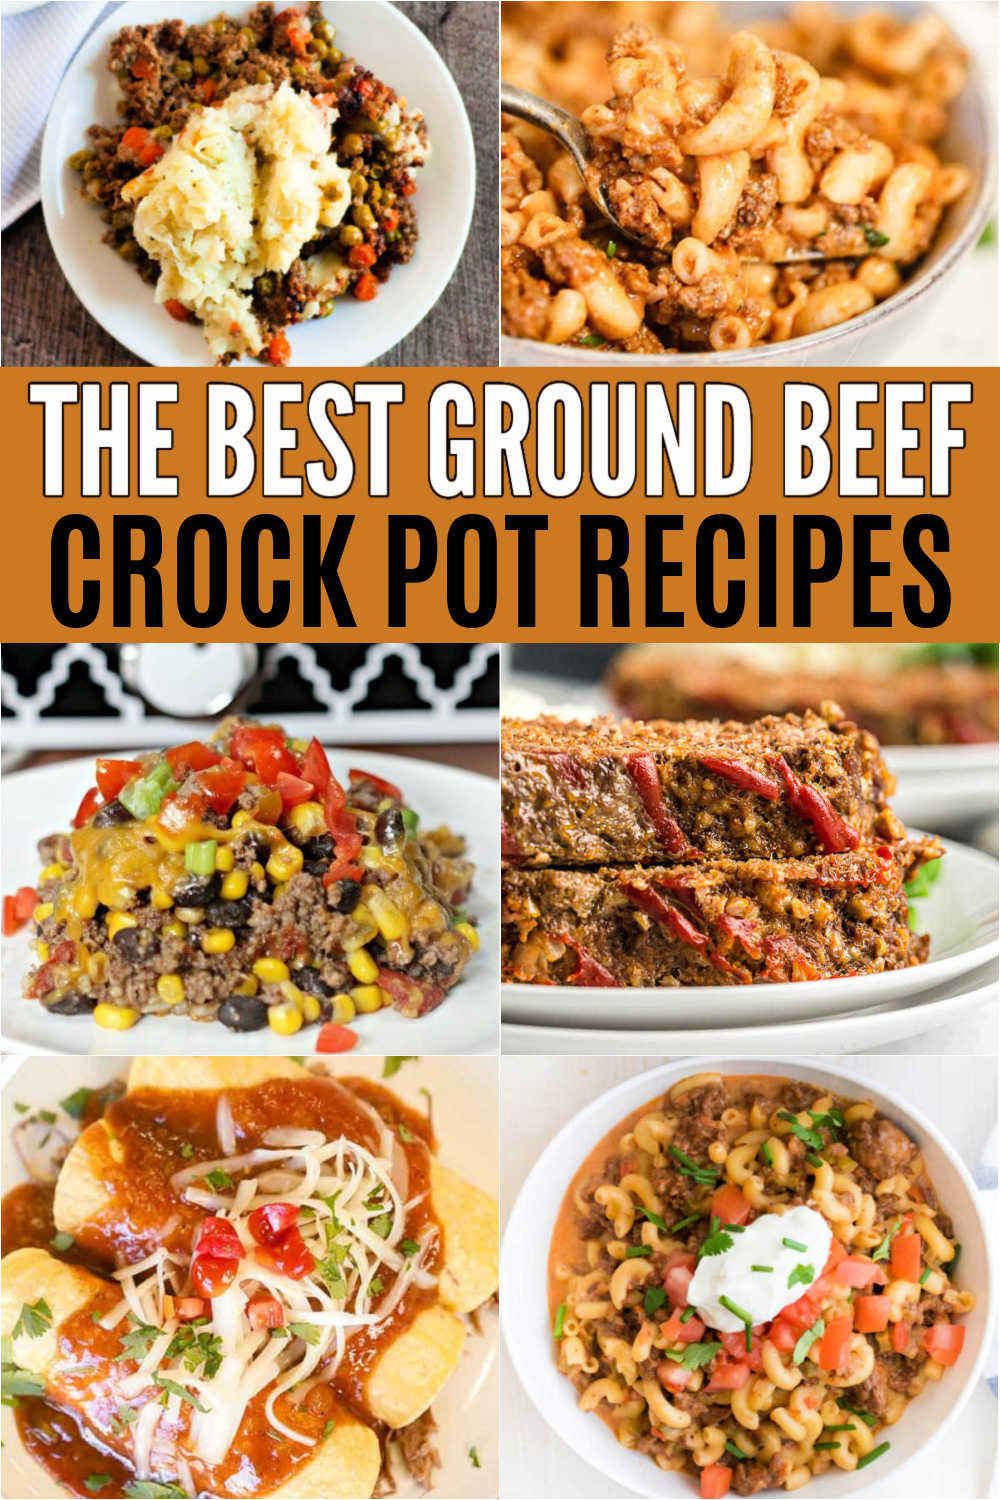 Try these easy Ground beef crock pot recipes on busy days. Lots of tasty ideas from casseroles and soup to meatloaf and more. You are going to love these crock pot ground beef recipes that are healthy and easy to make too! #eatingonadime #crockpotrecipes #slowcookerrecipes #groundbeefrecipes 